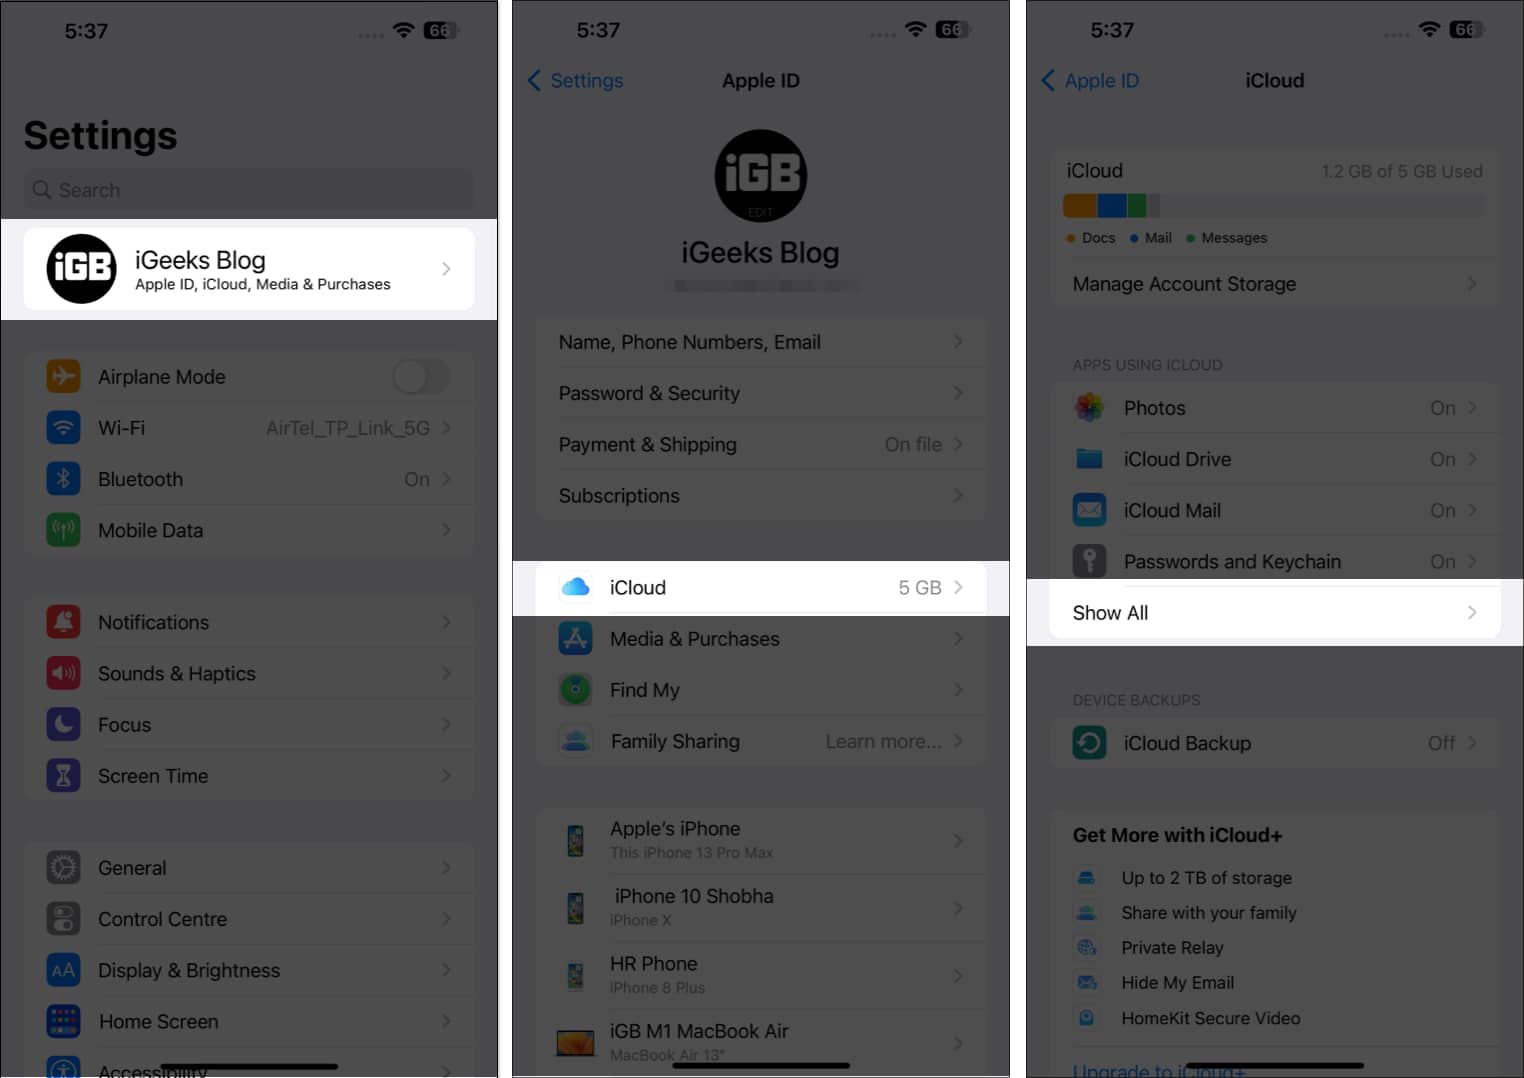 Tap on your Profile, iCloud, and Show All on iPhone